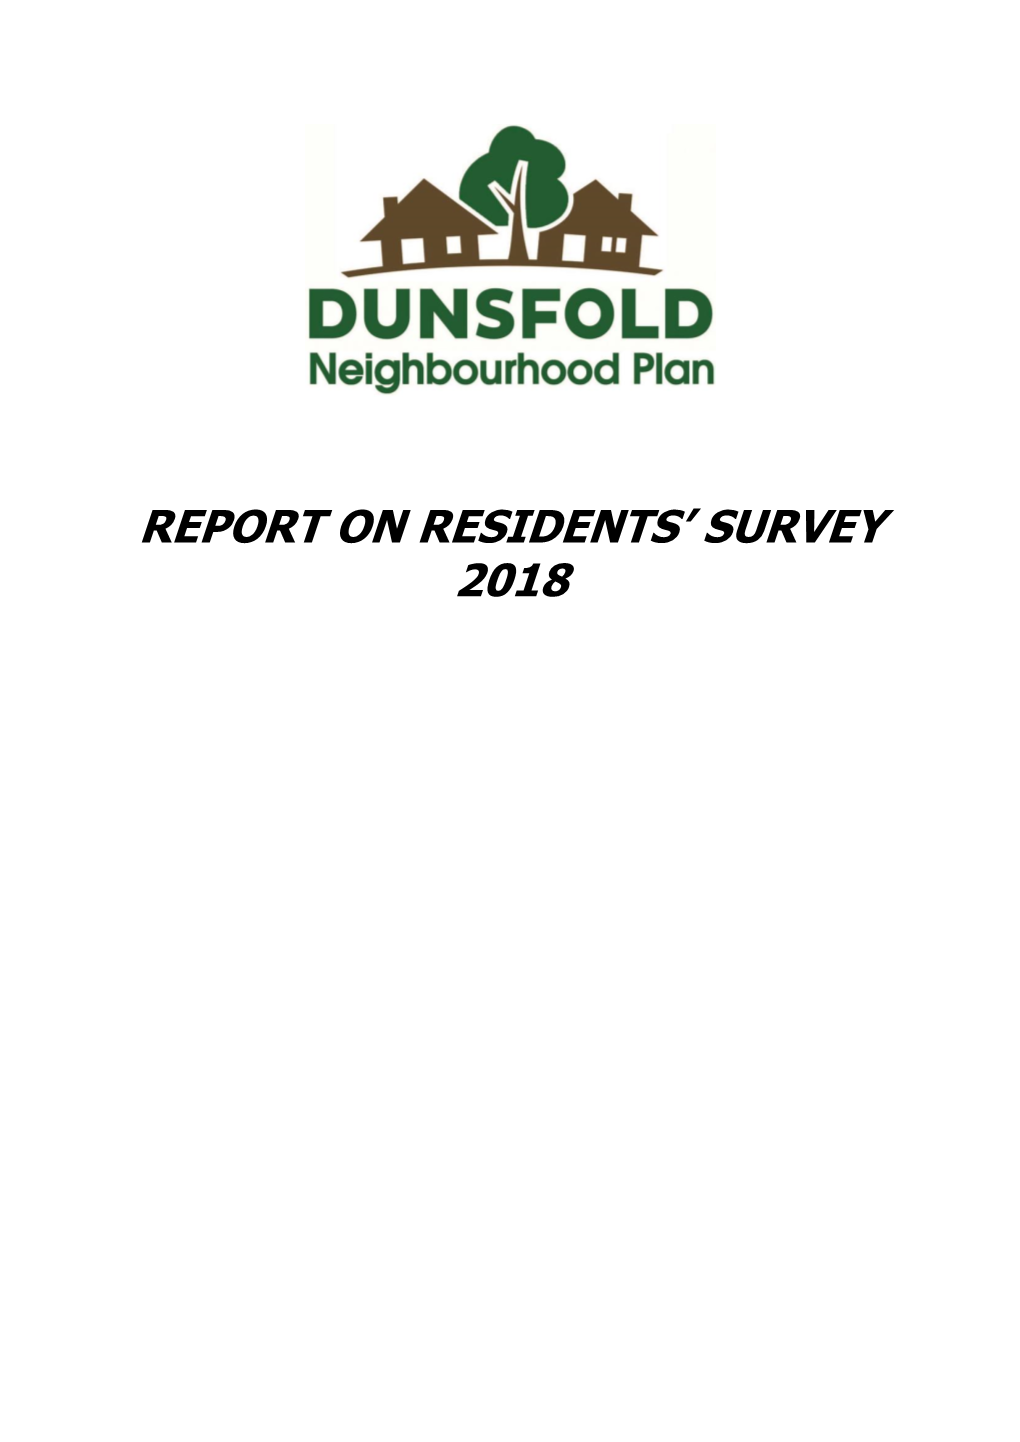 Report on Residents' Survey 2018